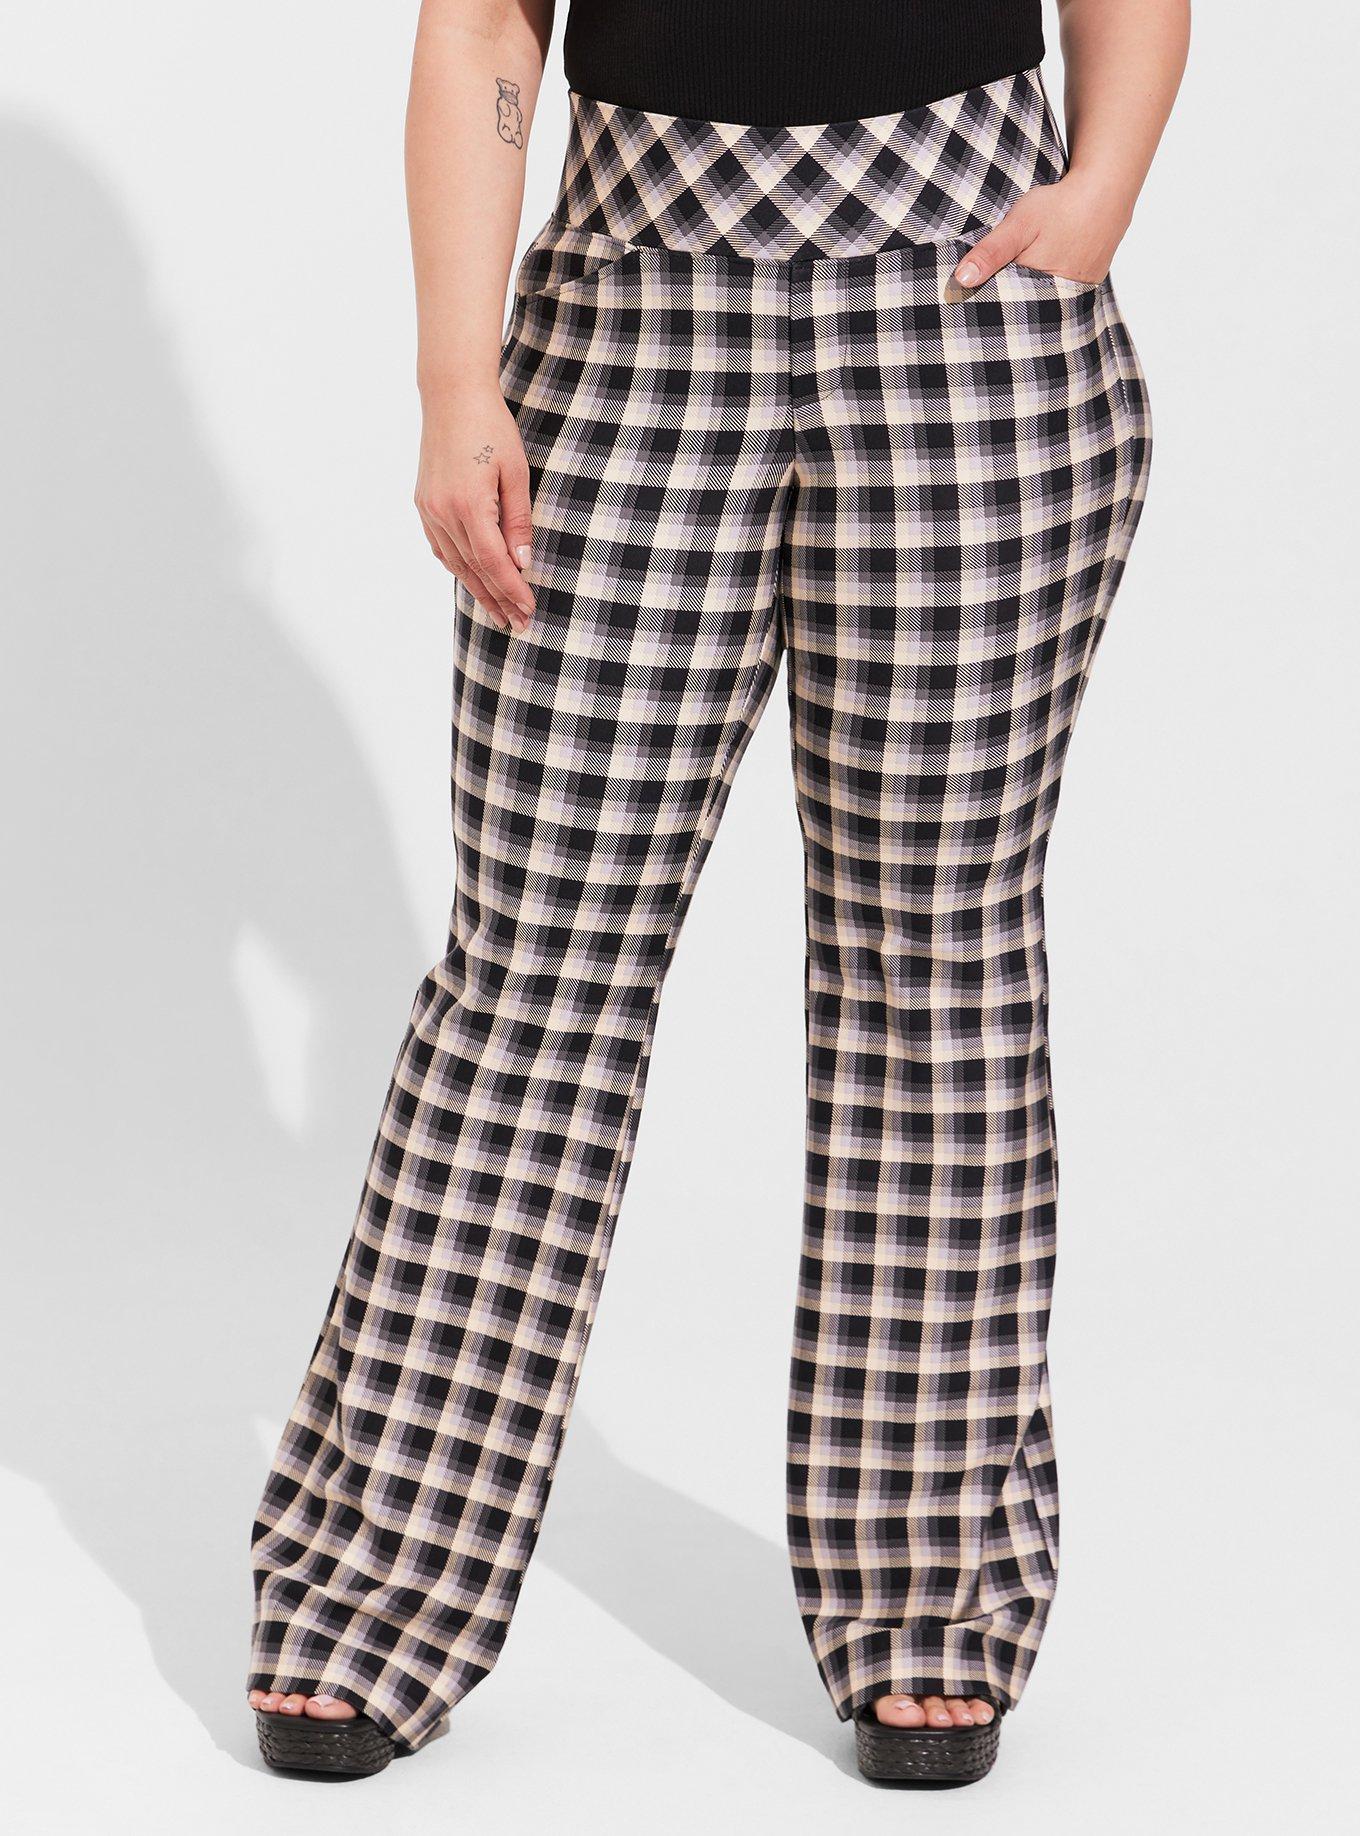 White House Black Market Grey Houndstooth Ponte Pants - Small – Le Prix  Fashion & Consulting